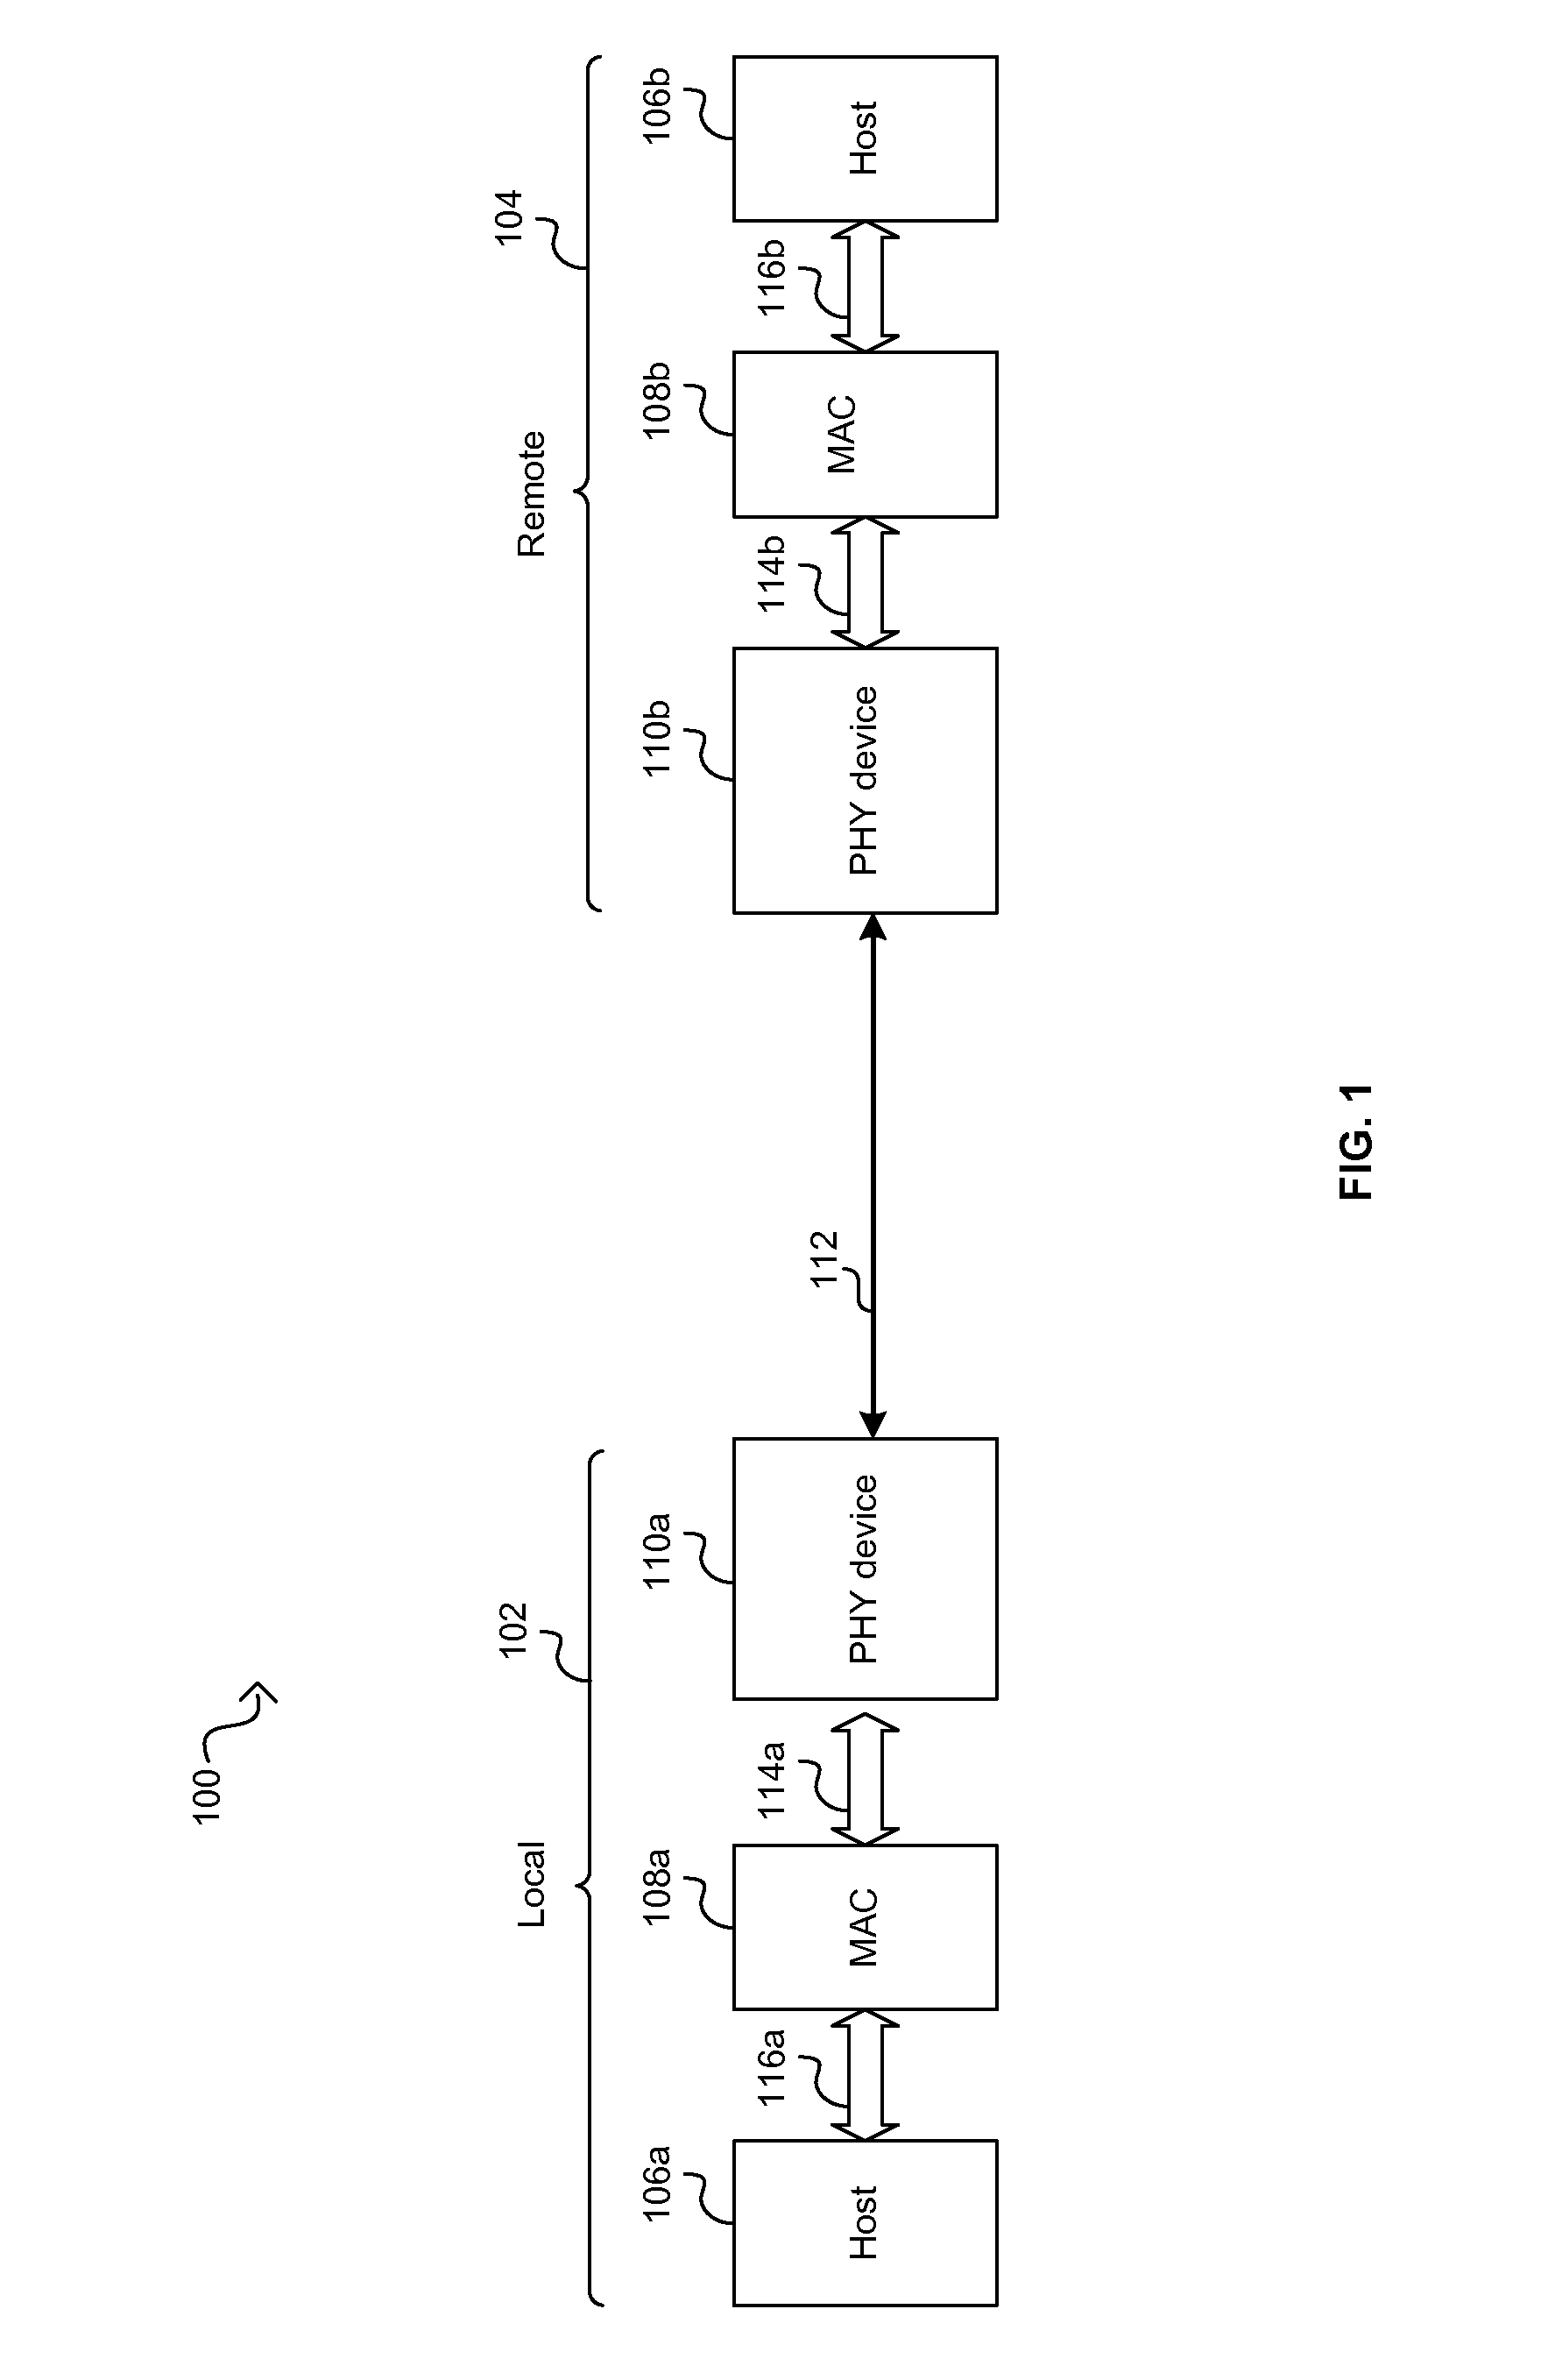 Method And System For Energy Efficient Communication Among One Or More Interfaces In A Communication Path